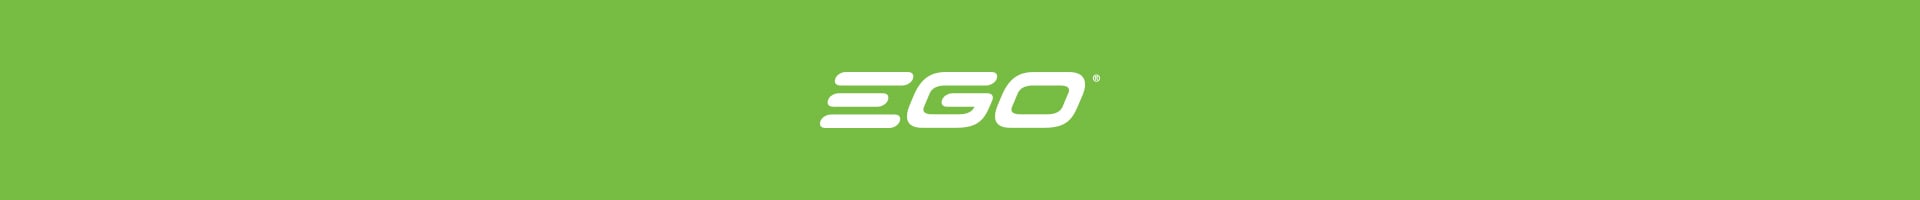 Free Battery Sale on Select EGO